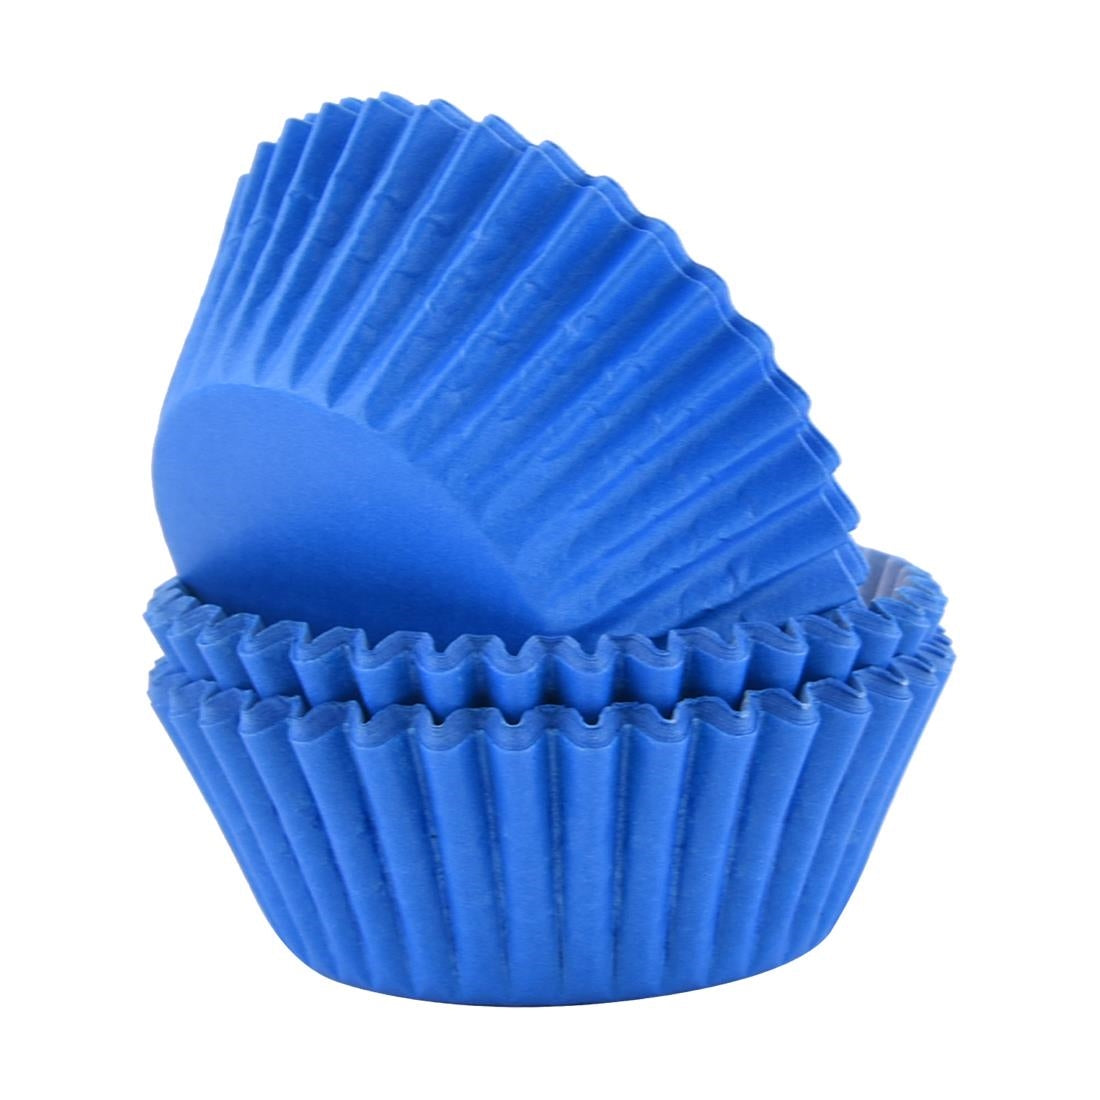 CX141 PME Block Colour Cupcake Cases Blue, Pack of 60 JD Catering Equipment Solutions Ltd